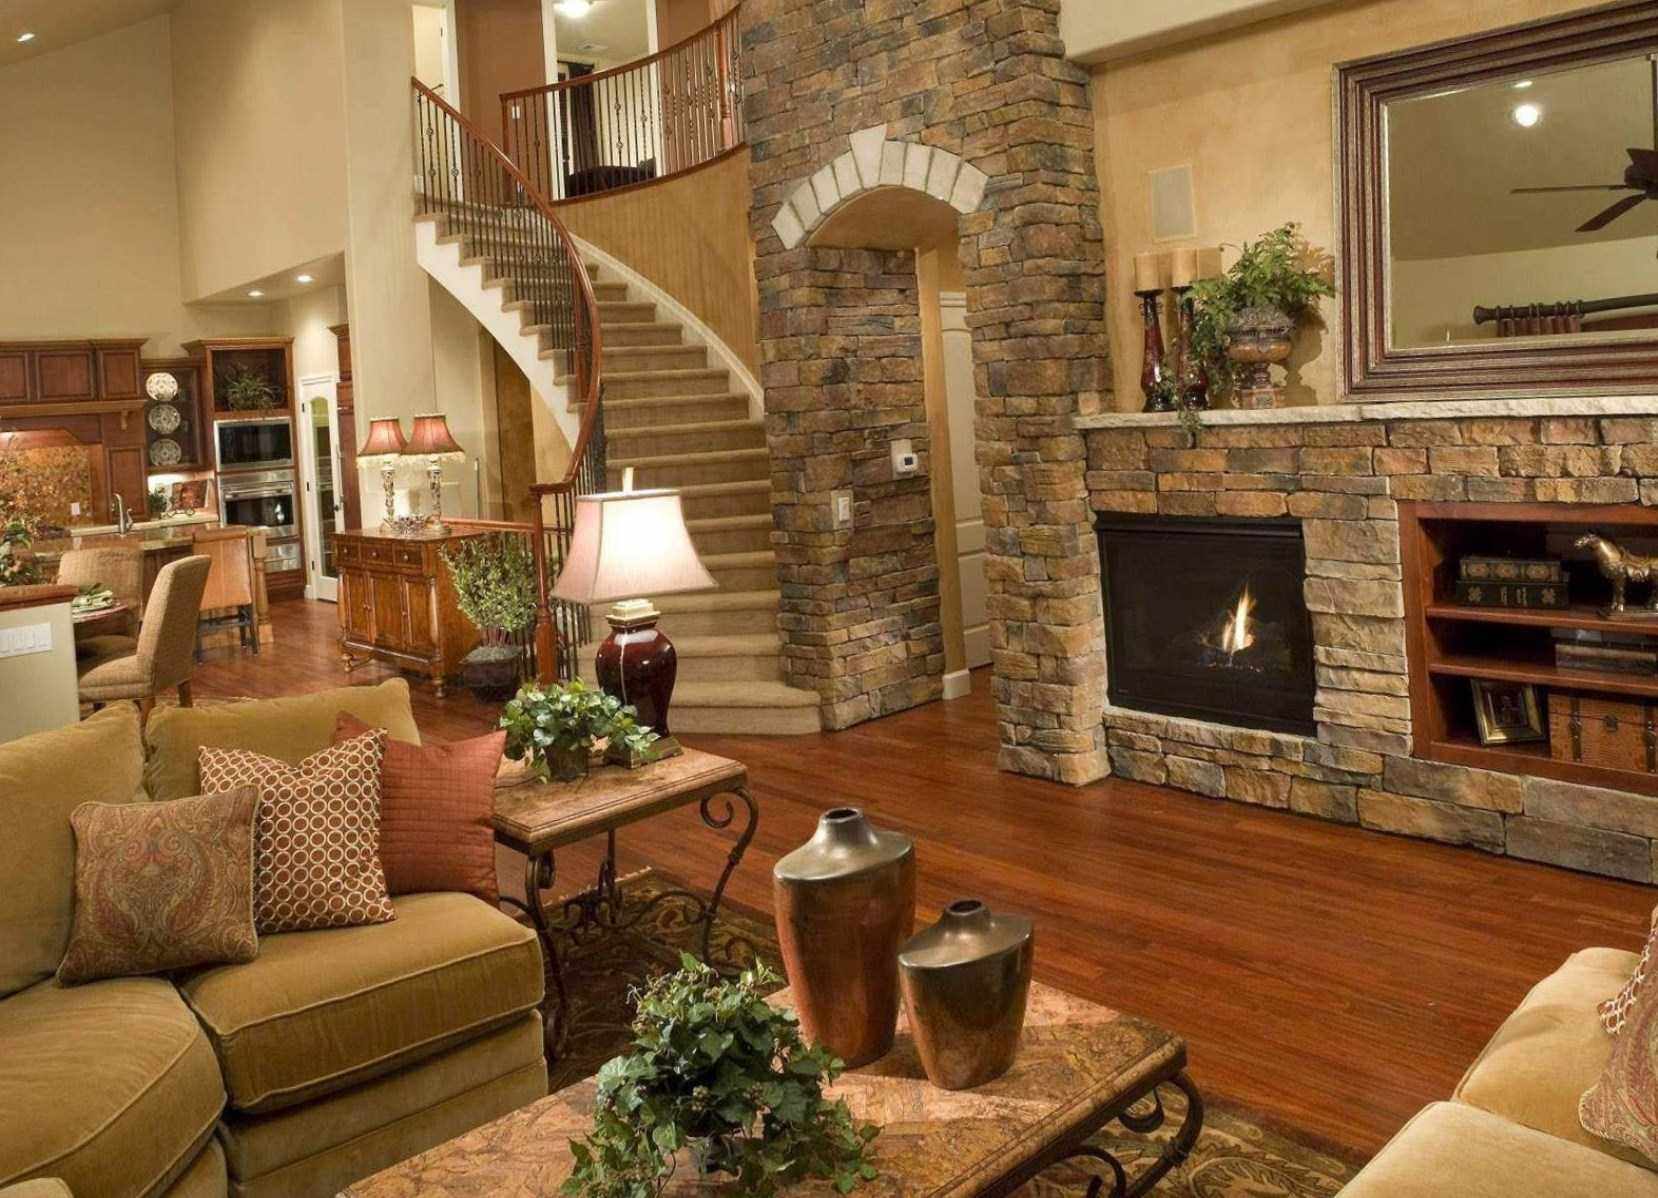 An example of the unusual design of a living room with a fireplace